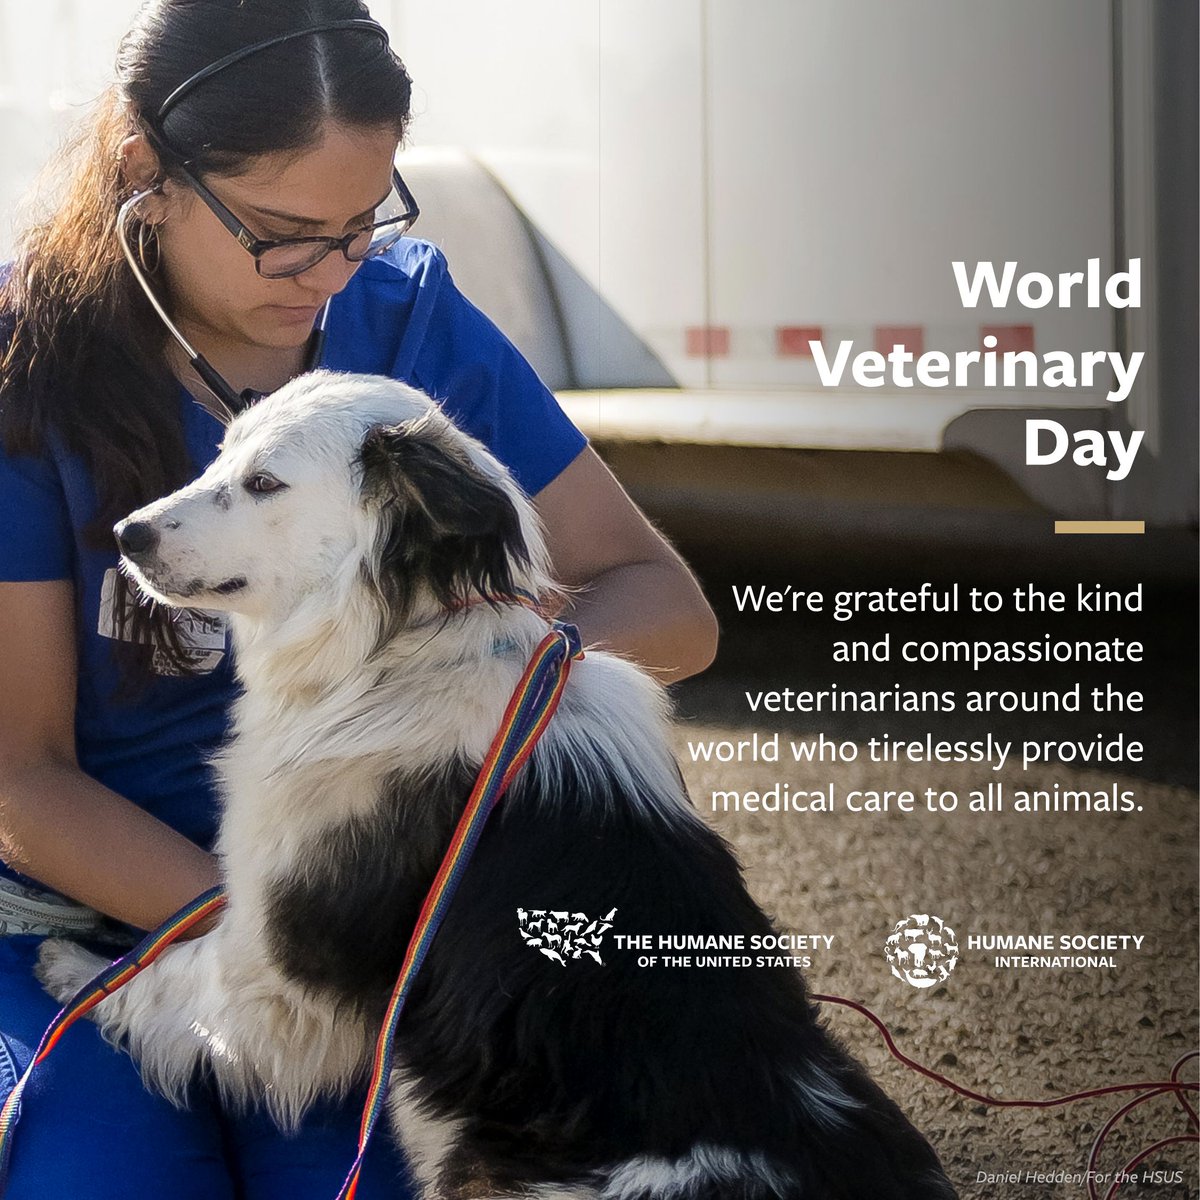 This #WorldVeterinaryDay we want to give a BIG shoutout to all the amazing veterinarians! Your unwavering dedication to caring for animals fills our world with hope and compassion. Thank YOU for being true guardians of all animals—from furry to scaled, from wild to companion!